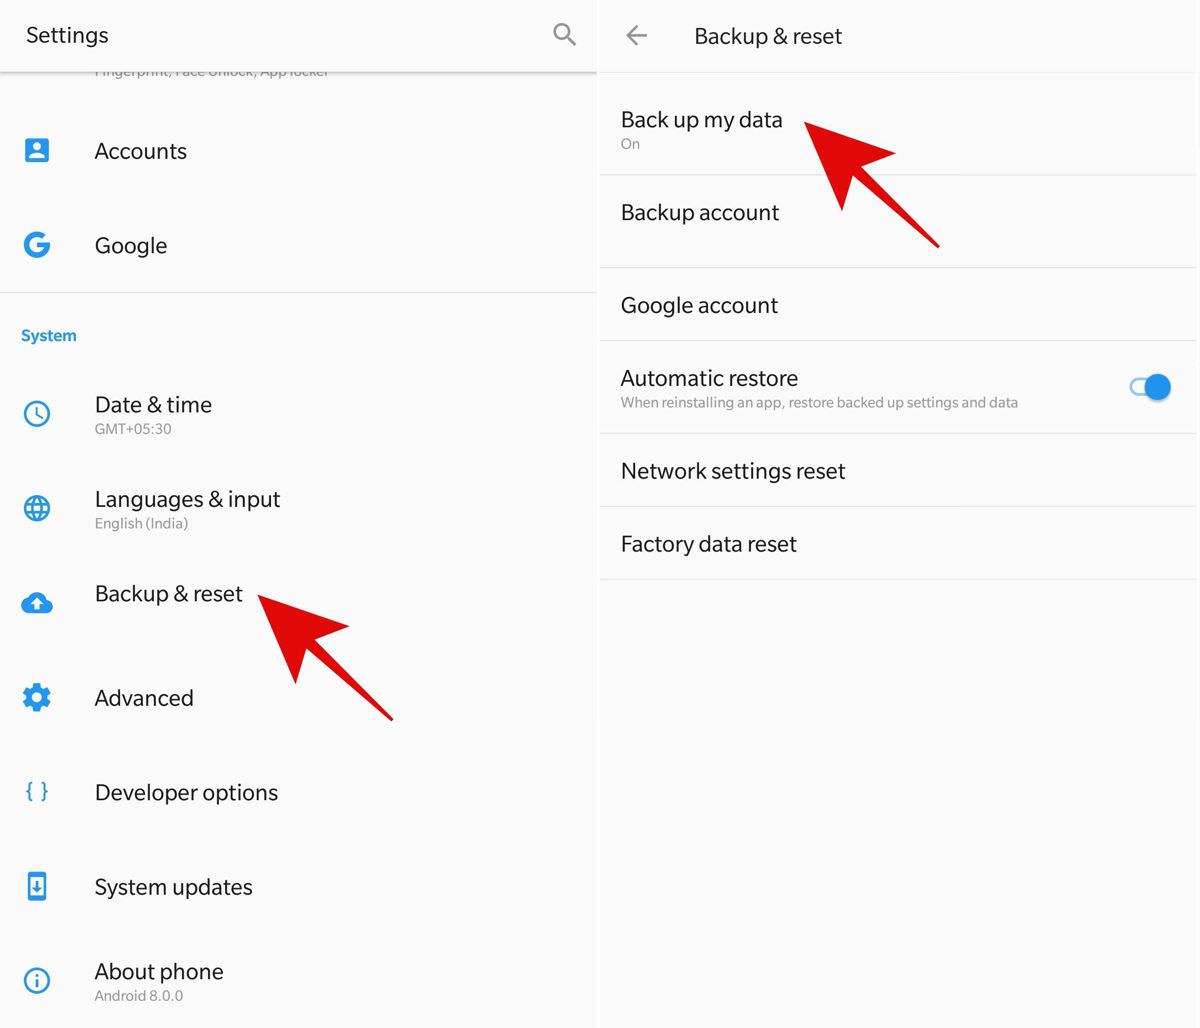 Backup & reset options in Android